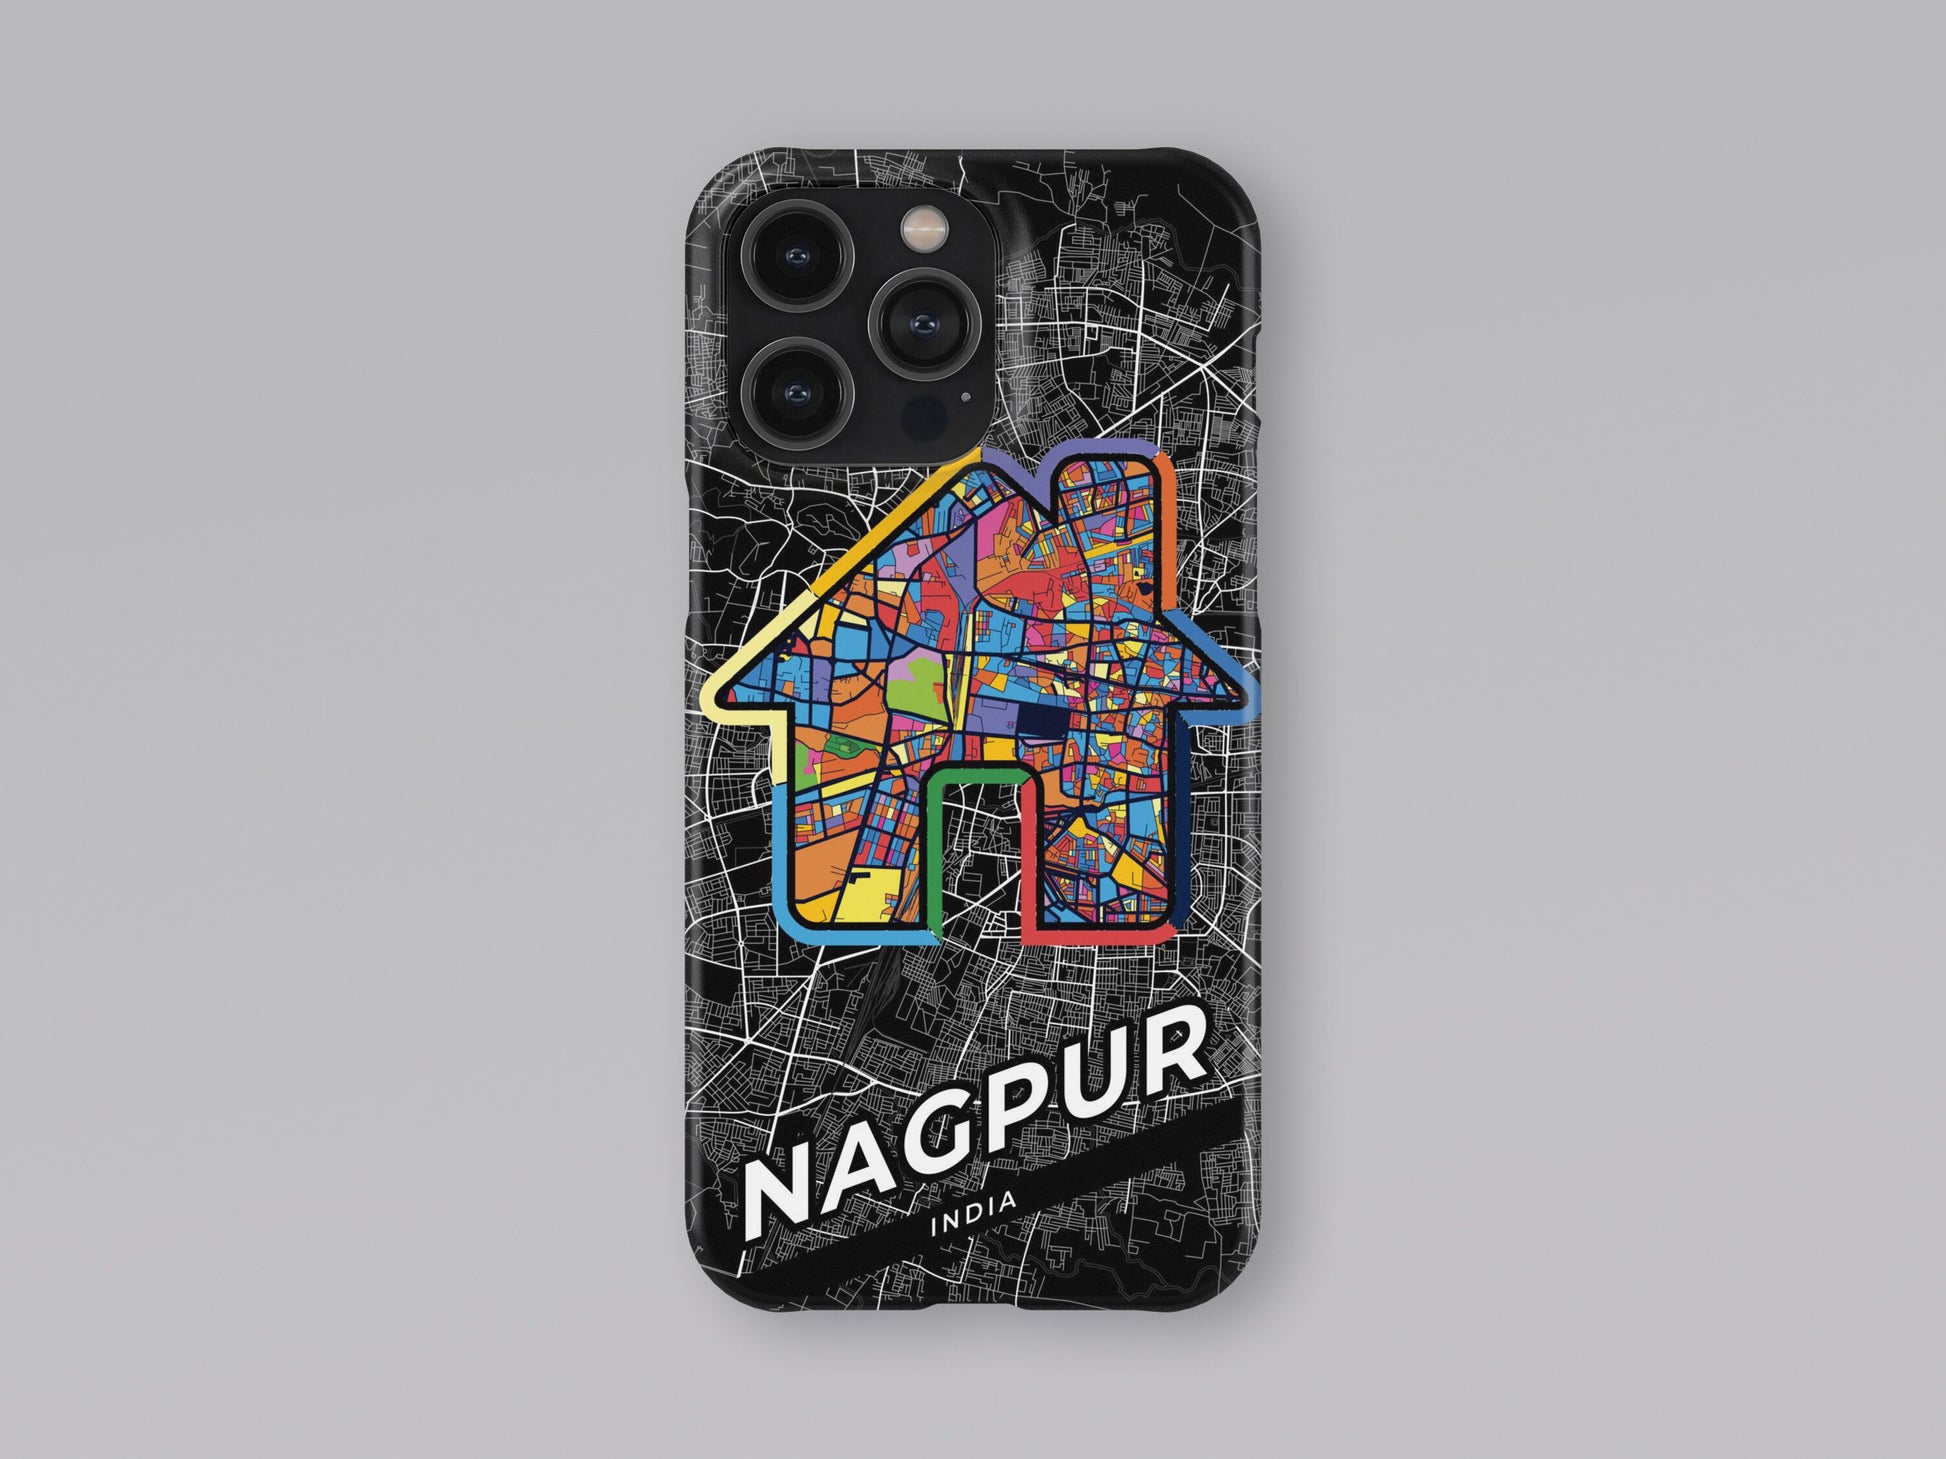 Nagpur India slim phone case with colorful icon 3